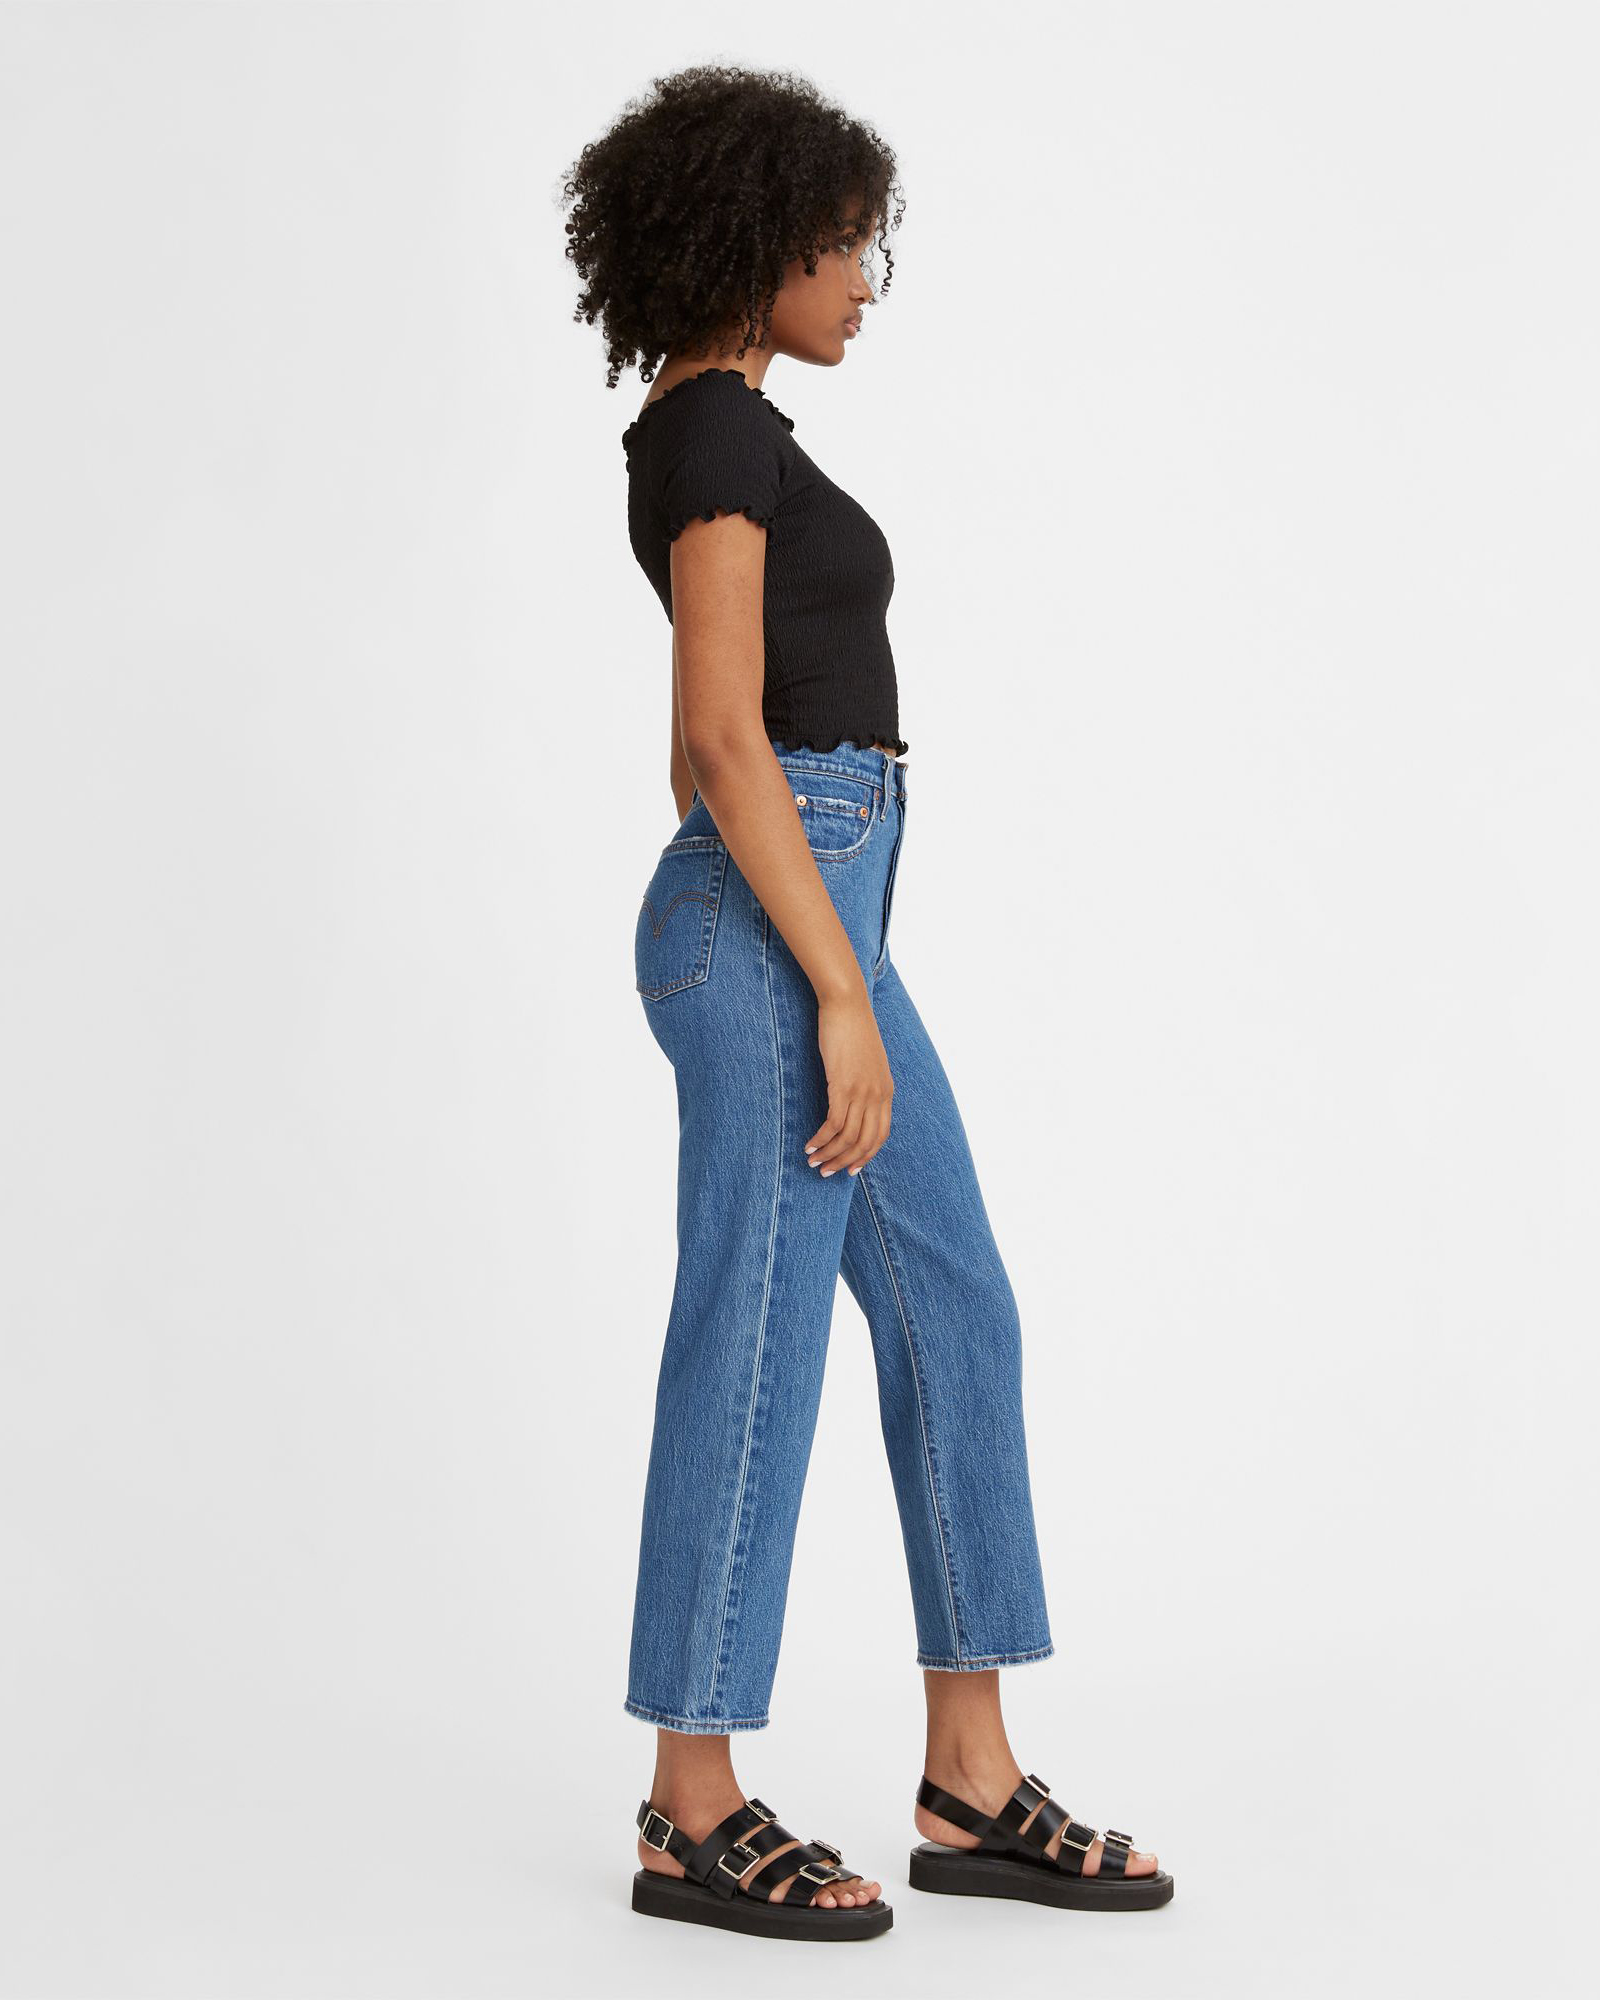 Jeans Ribcage Straight Ankle - Jazz Pop